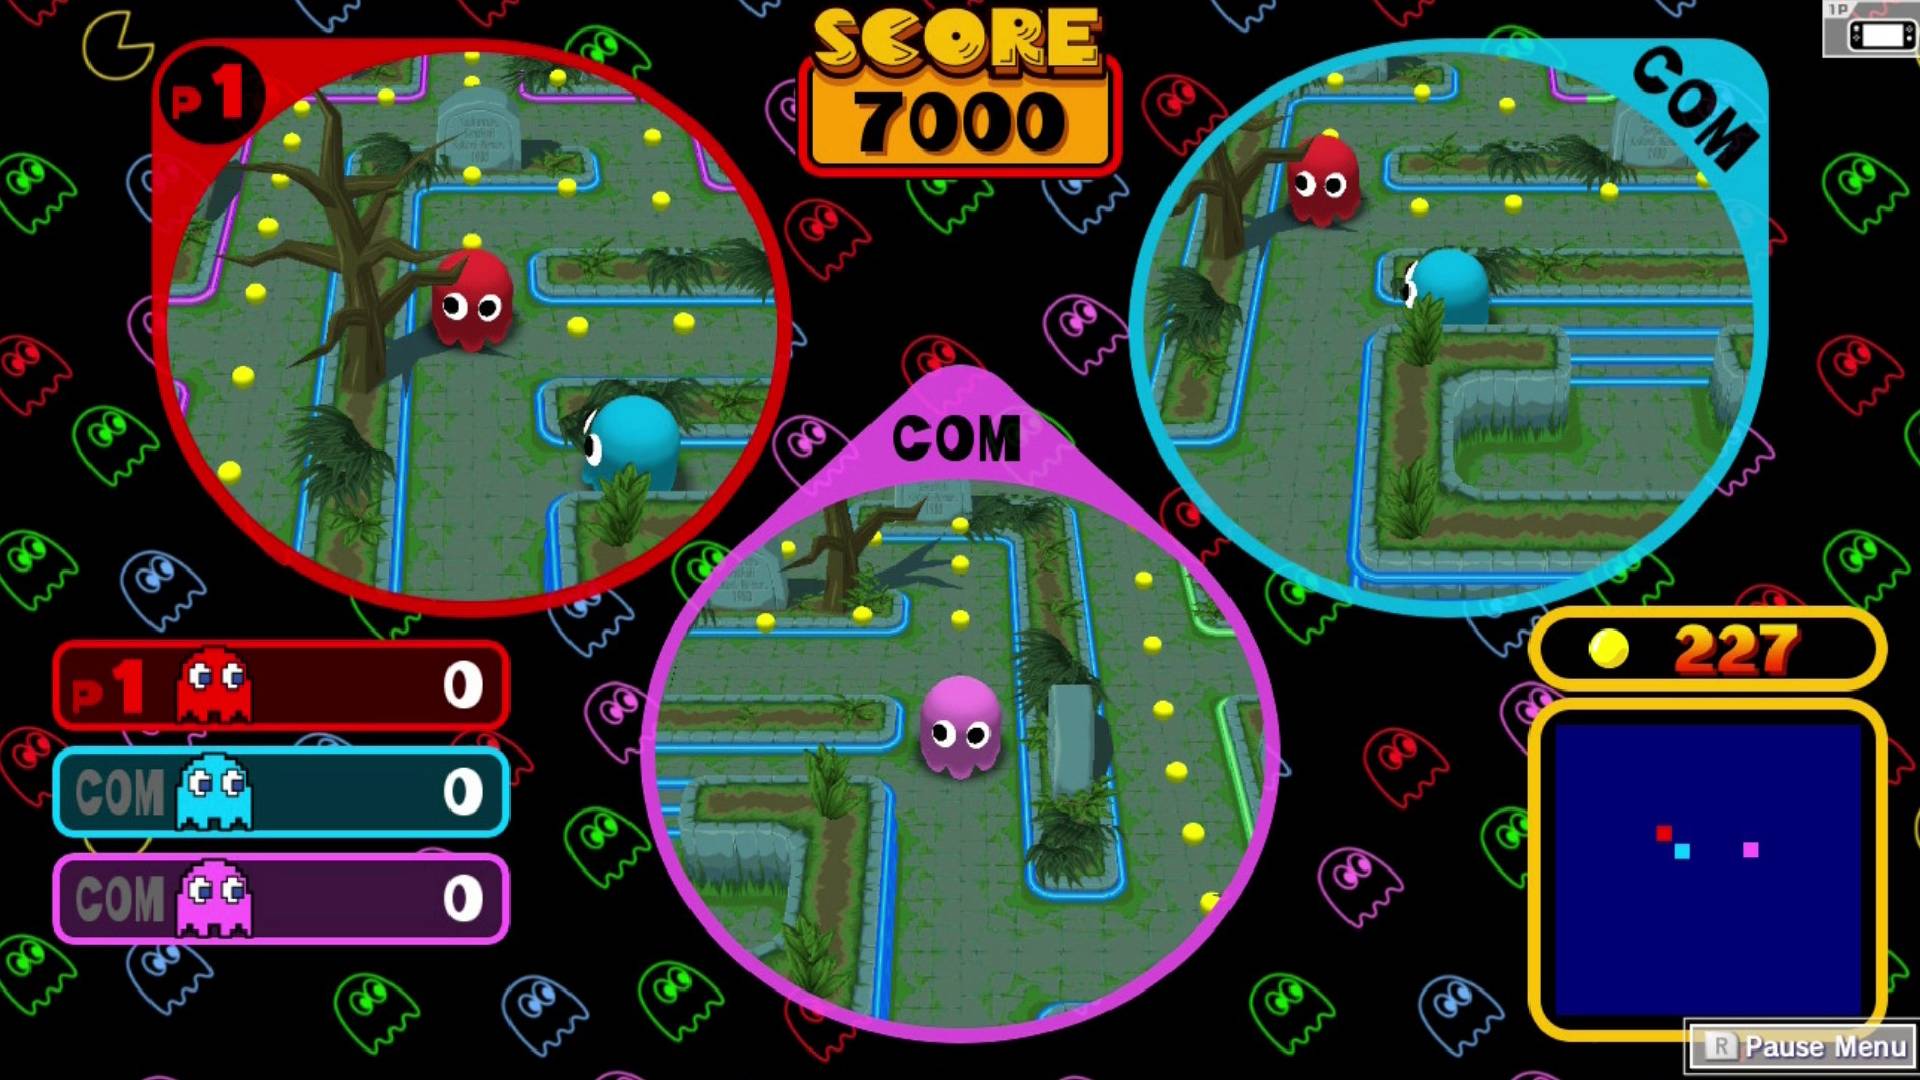 Best Pac-Man games: A few players are playing a competitive version of Pac-Man